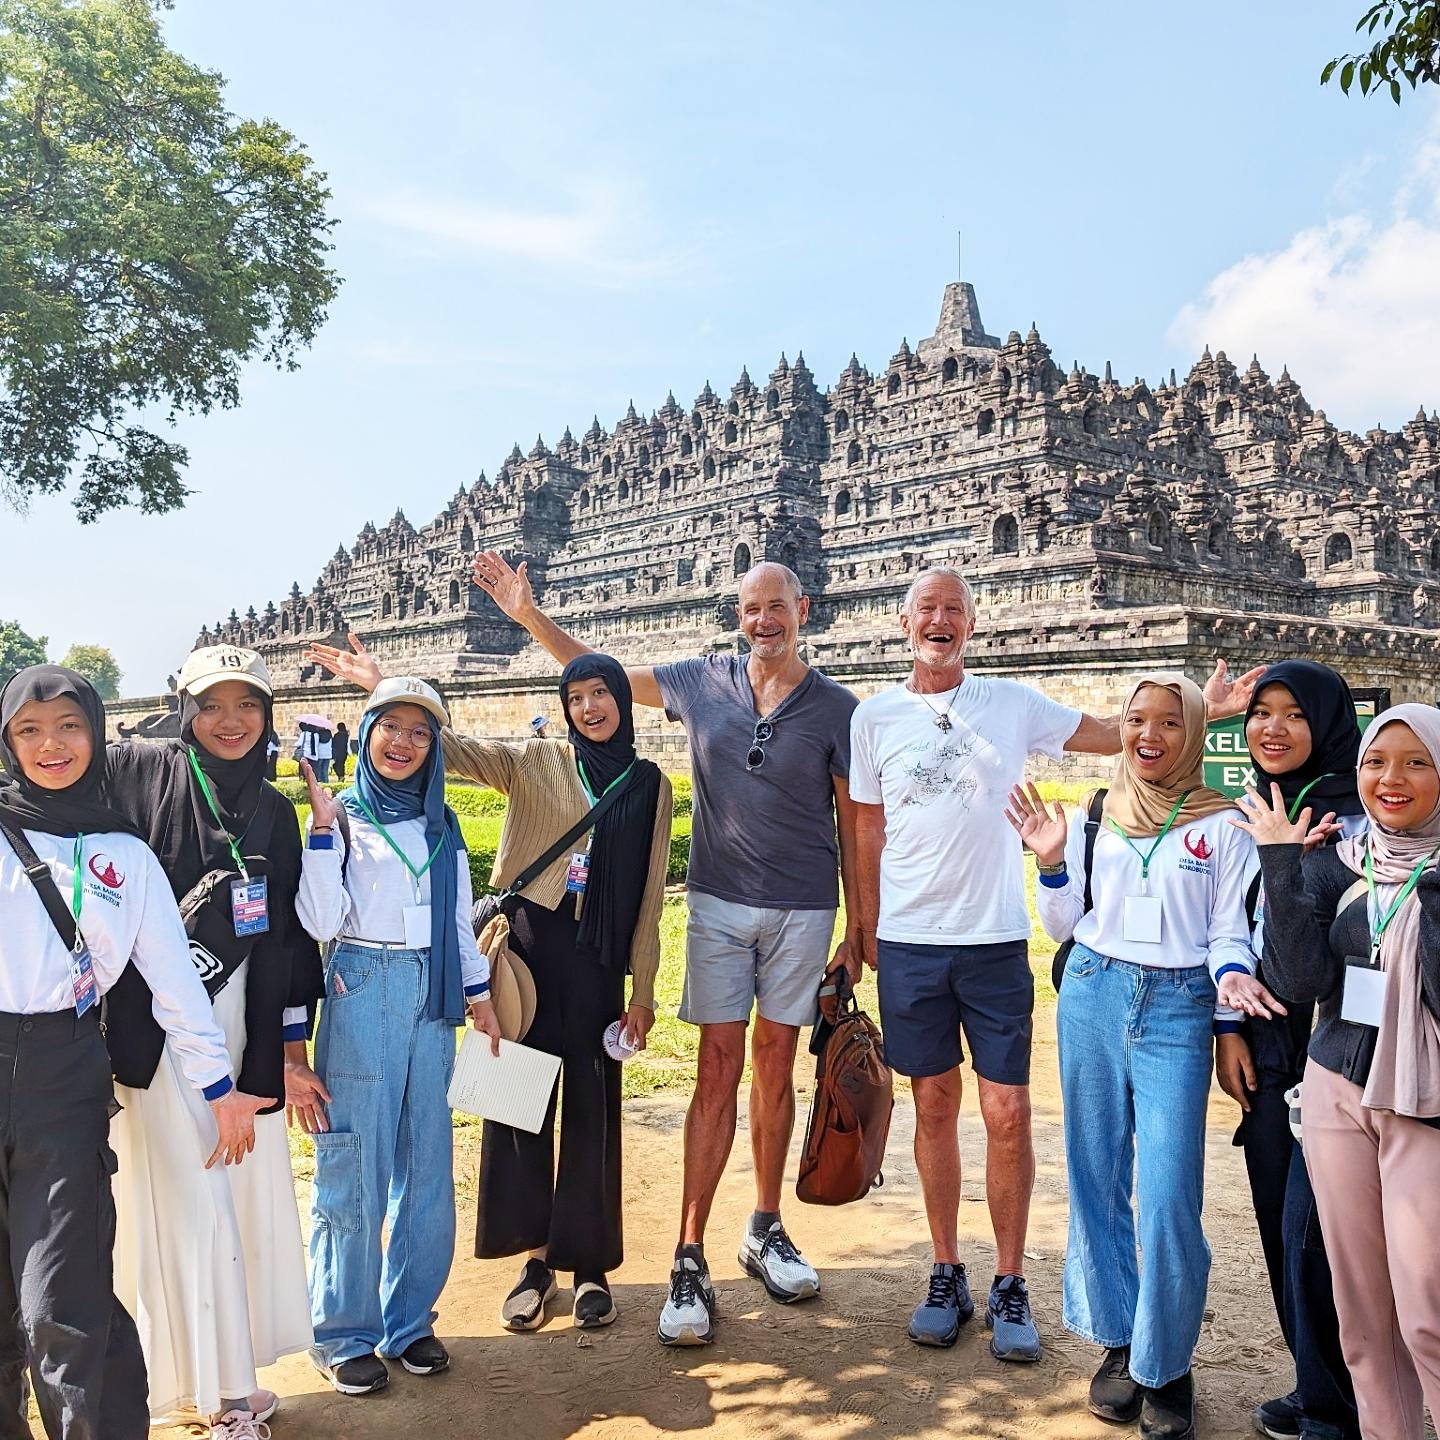 We've been called Travel Ambassadors numerous times! When we get approached by curious students who want to interview us and practice their English we realize how wonderful this travel life truly is! ❤️ These Indonesian students were so bright and ha